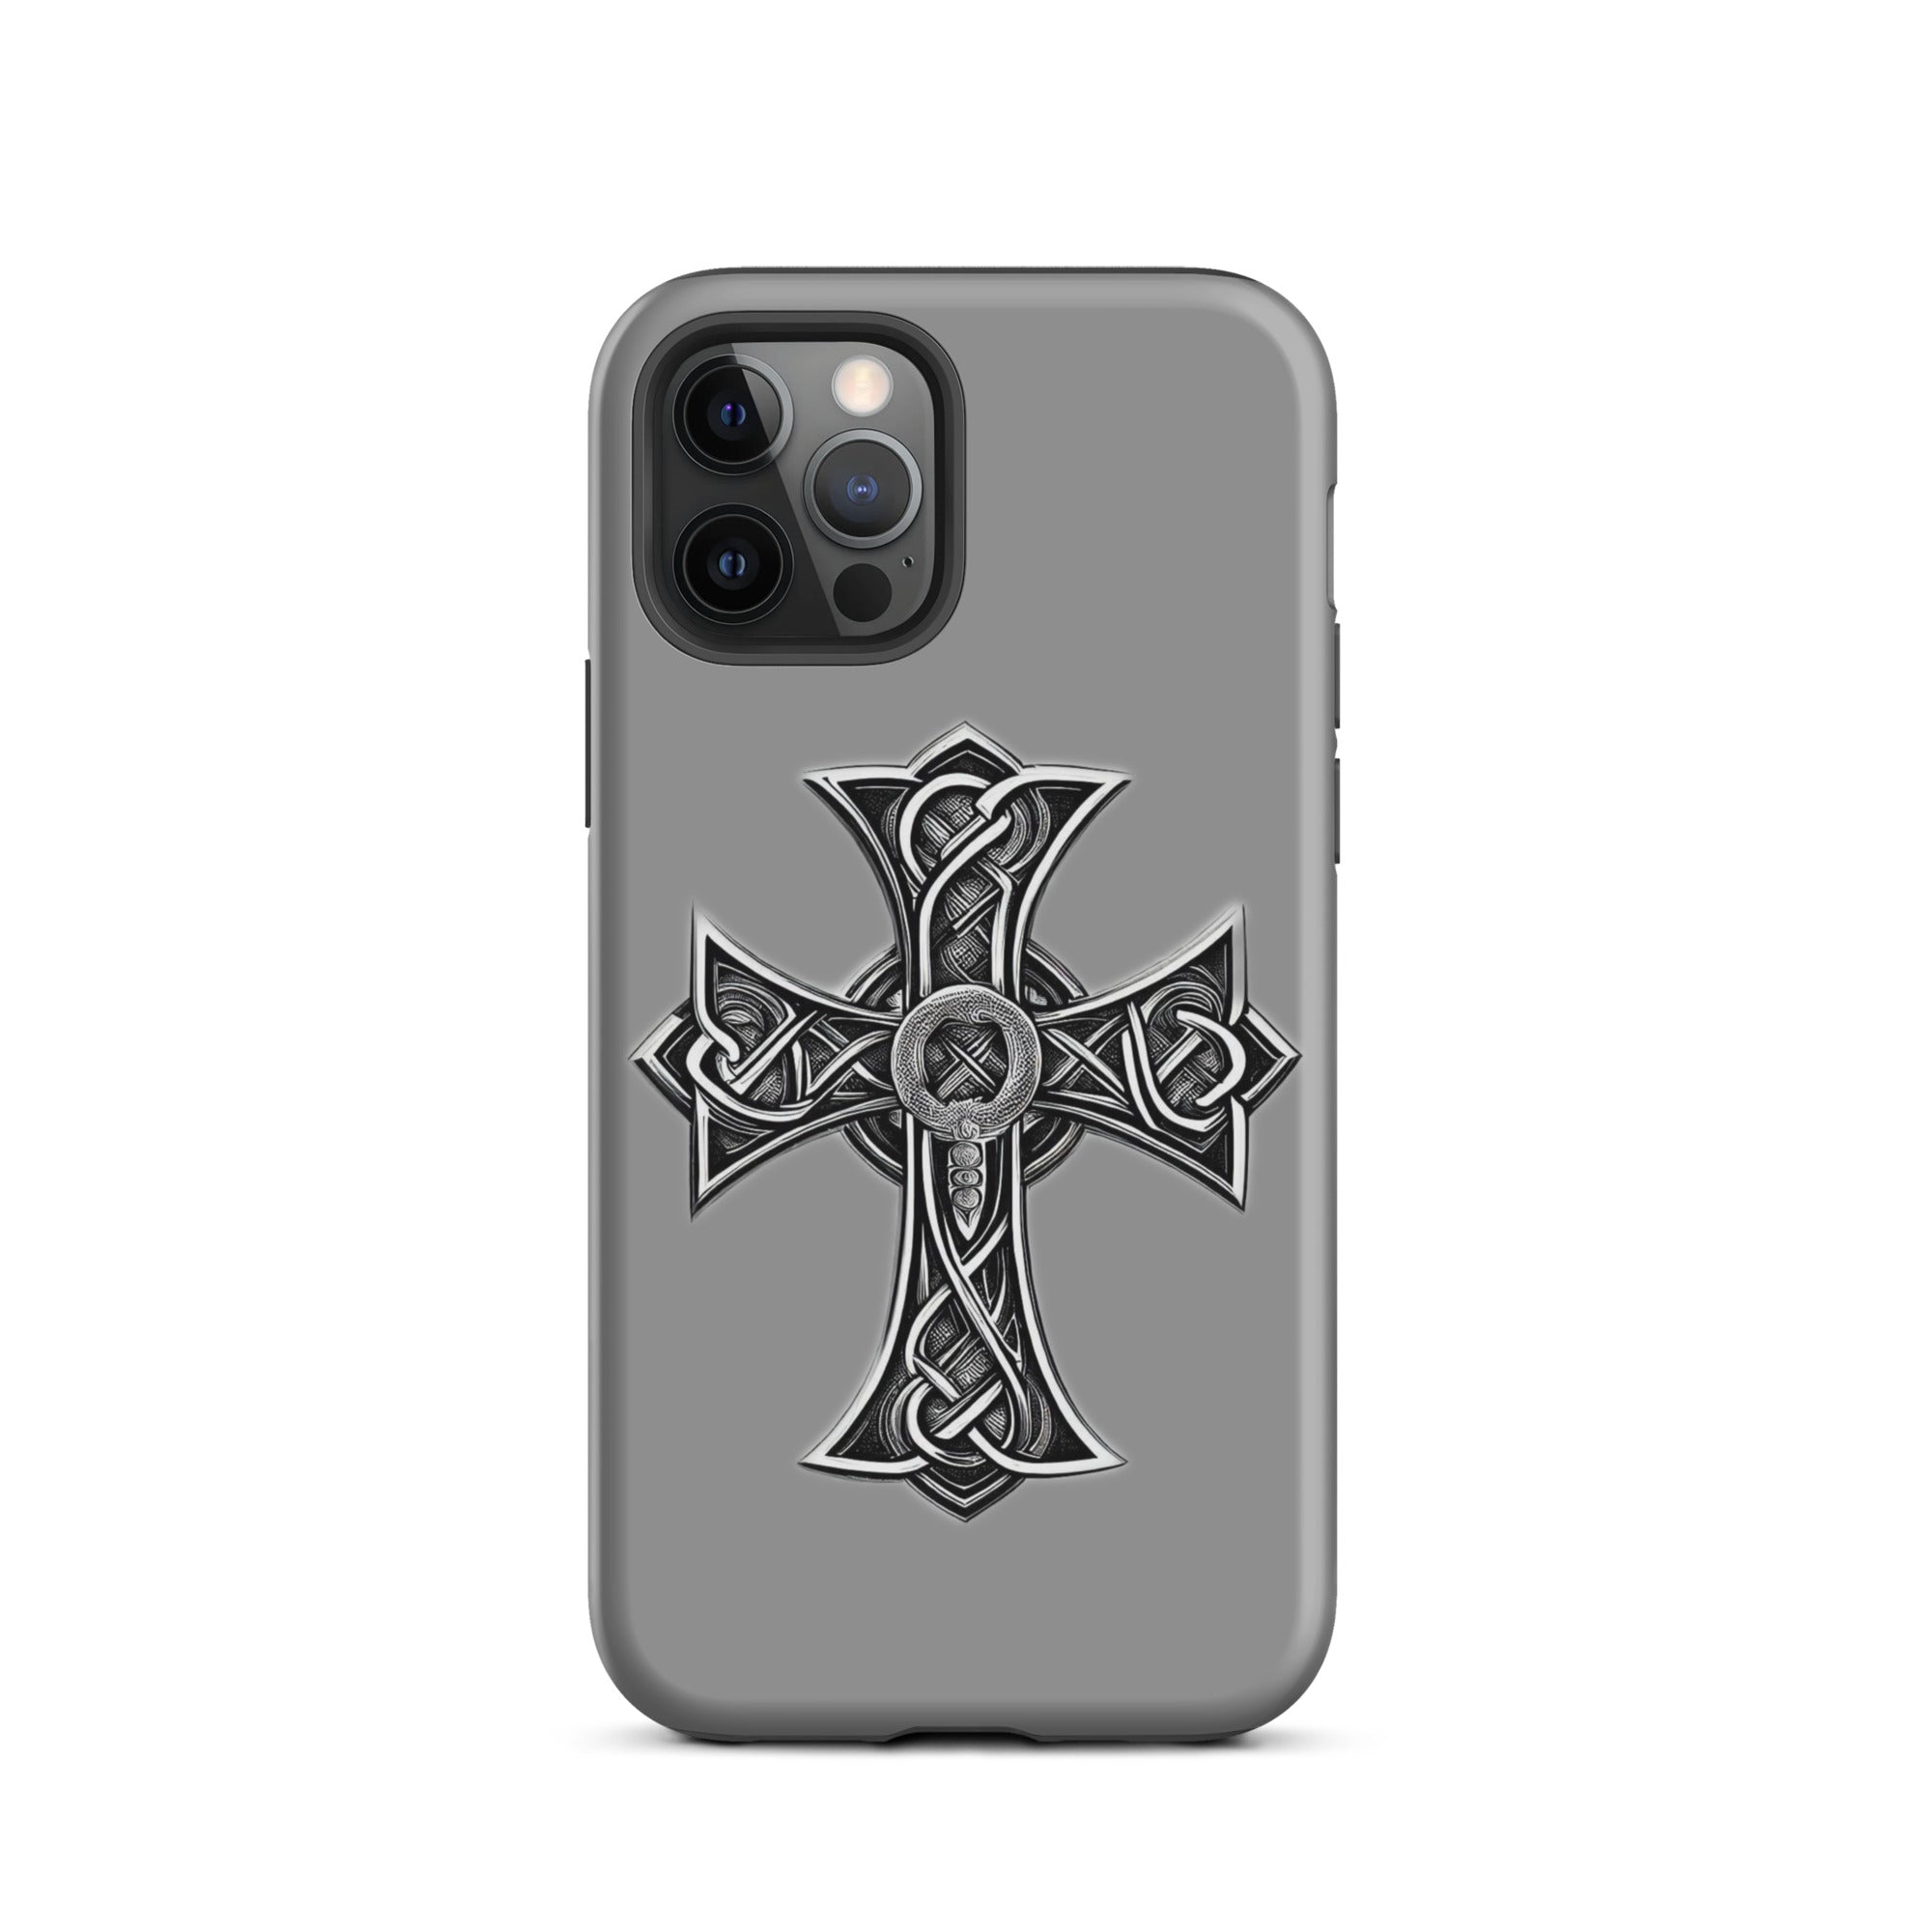 tough-case-for-iphone-matte-iphone-12-pro-front-6563847713fbf.jpg